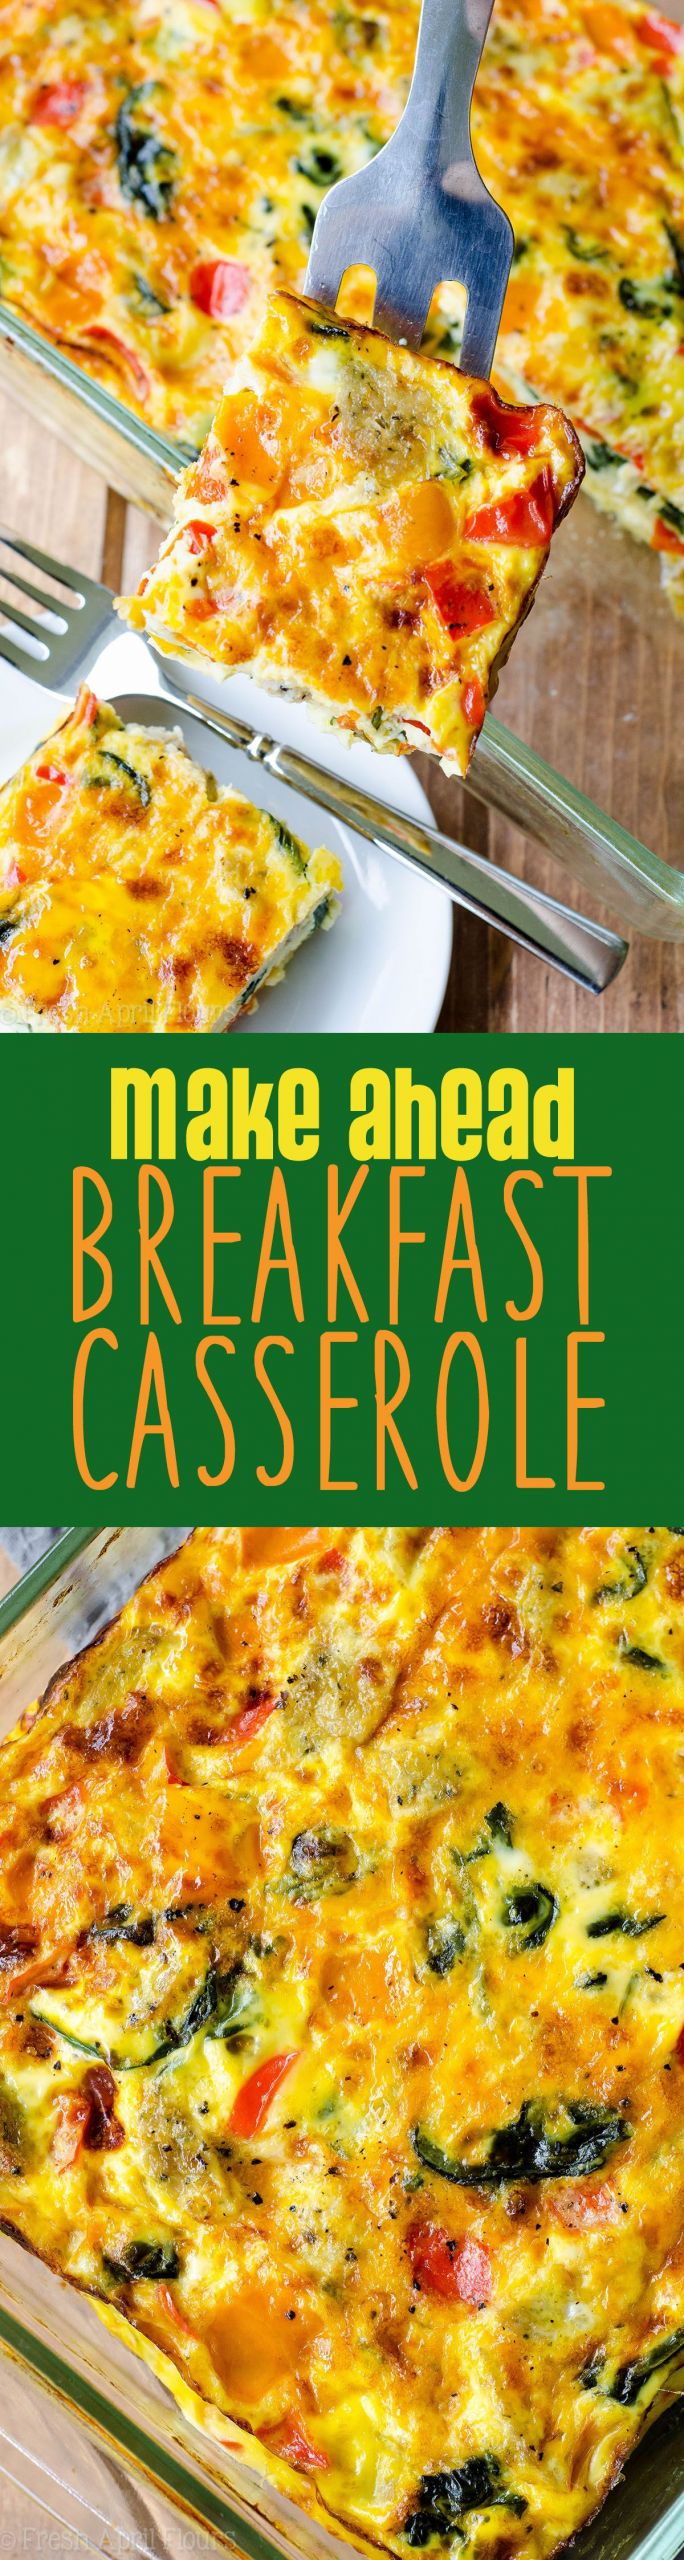 Make Ahead Dinners For Entertaining
 Make Ahead Breakfast Casserole This sausage ve able